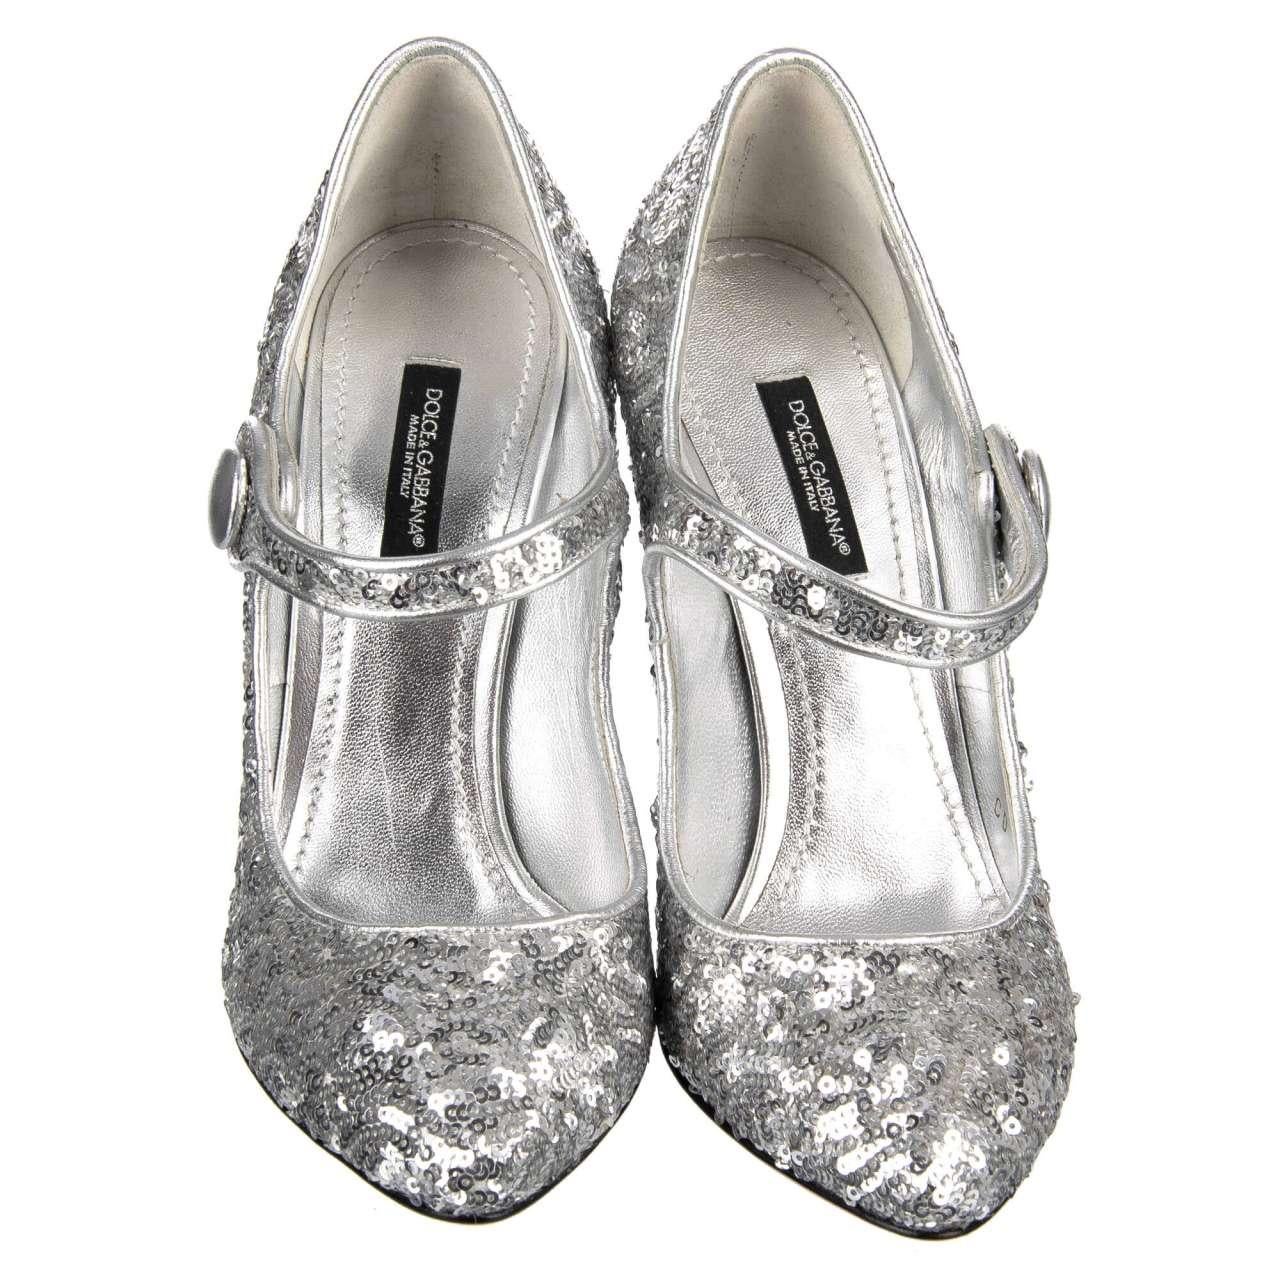 Dolce & Gabbana - Sequined Mary Janes VALLY Silver EUR 35.5 In Excellent Condition For Sale In Erkrath, DE